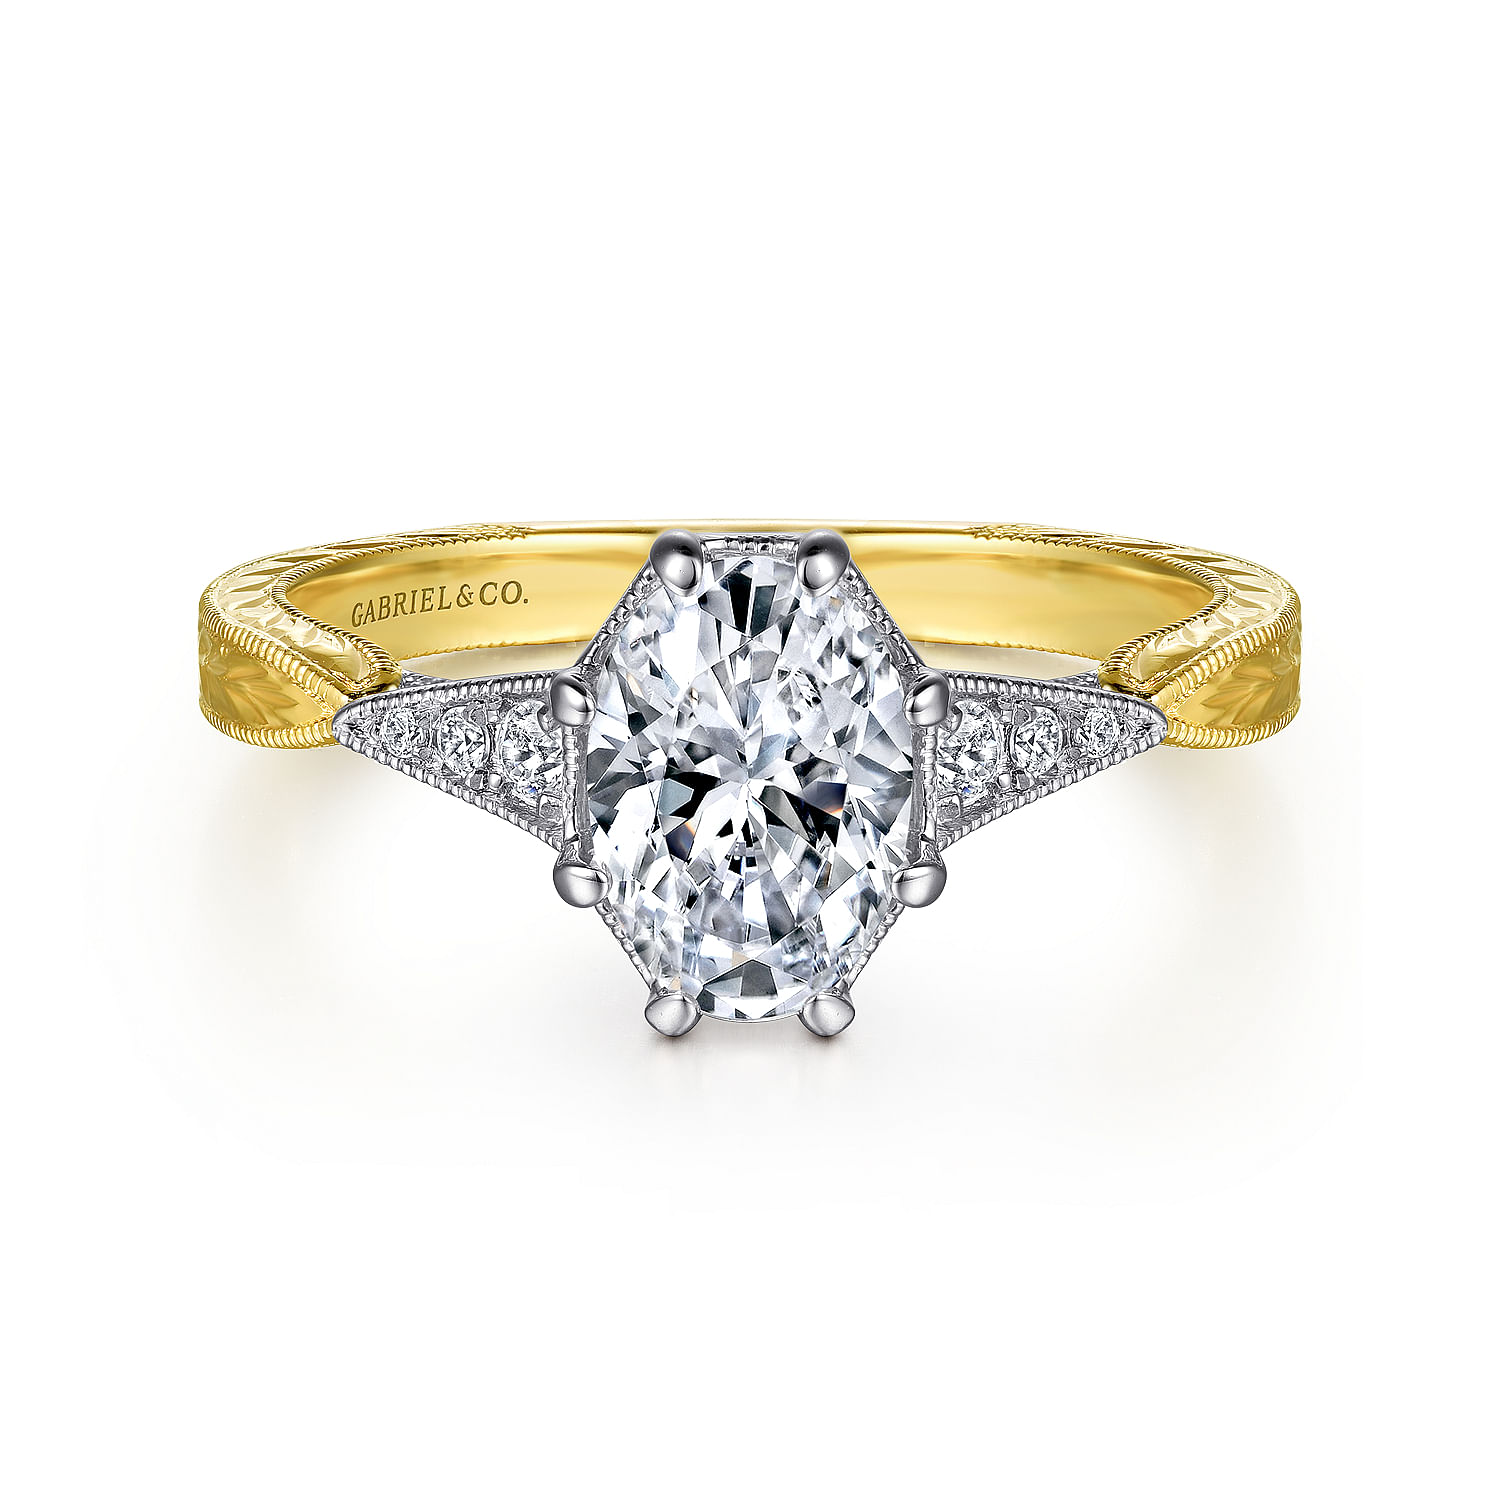 Gabriel - Vintage Inspired 14K White-Yellow Gold Oval Diamond Engagement Ring